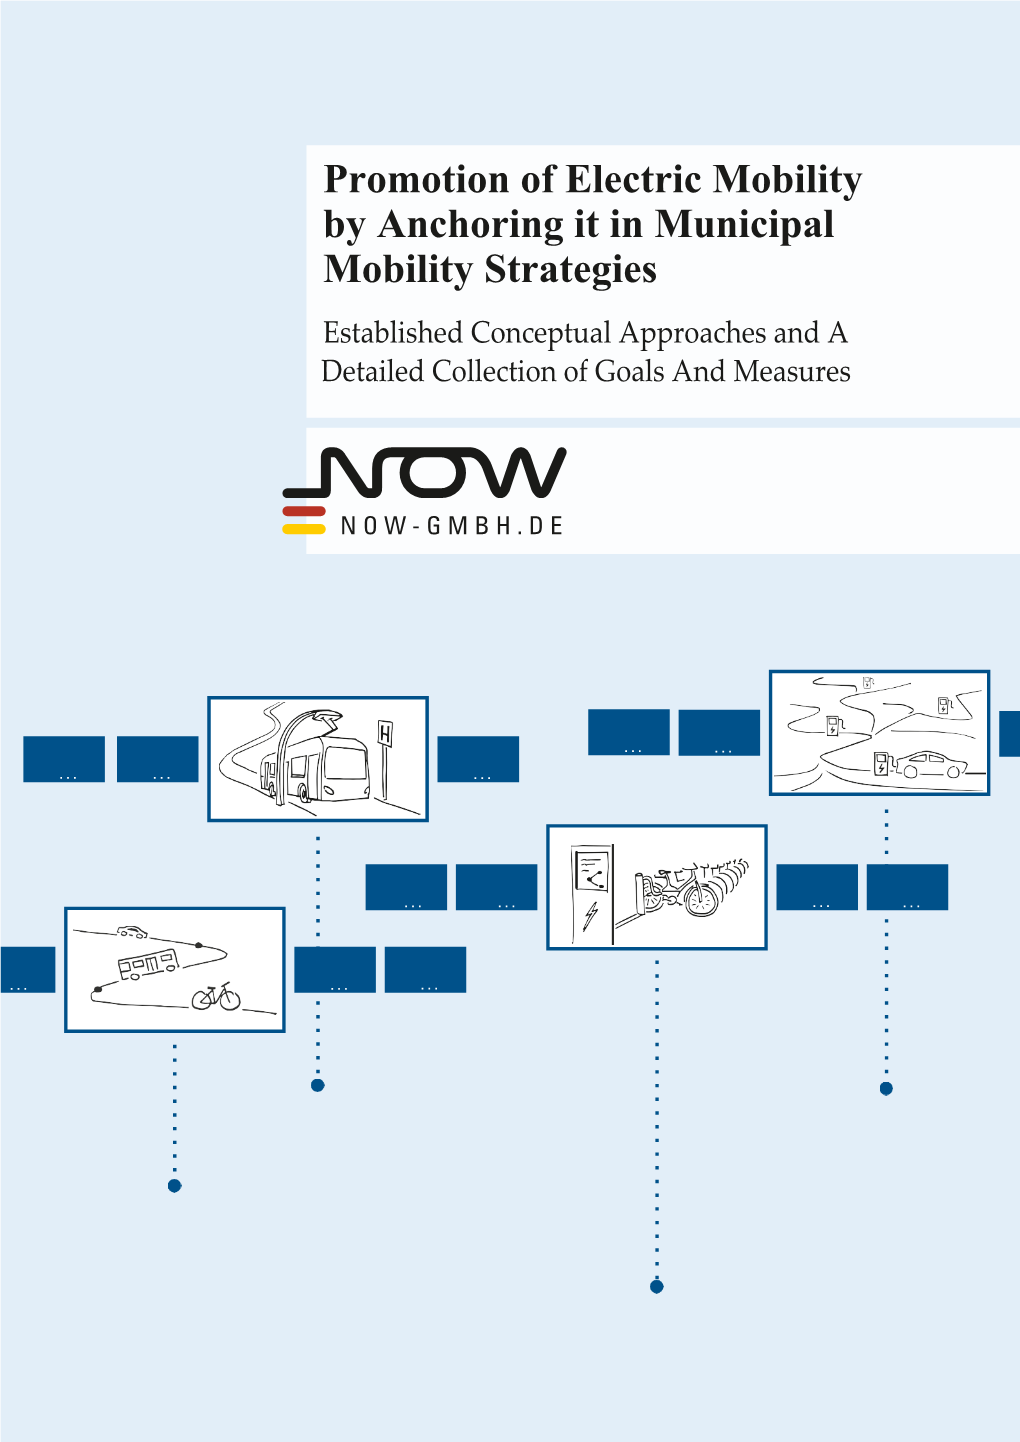 Promotion of Electric Mobility by Anchoring It in Municipal Mobility Strategies Established Conceptual Approaches and a Detailed Collection of Goals and Measures